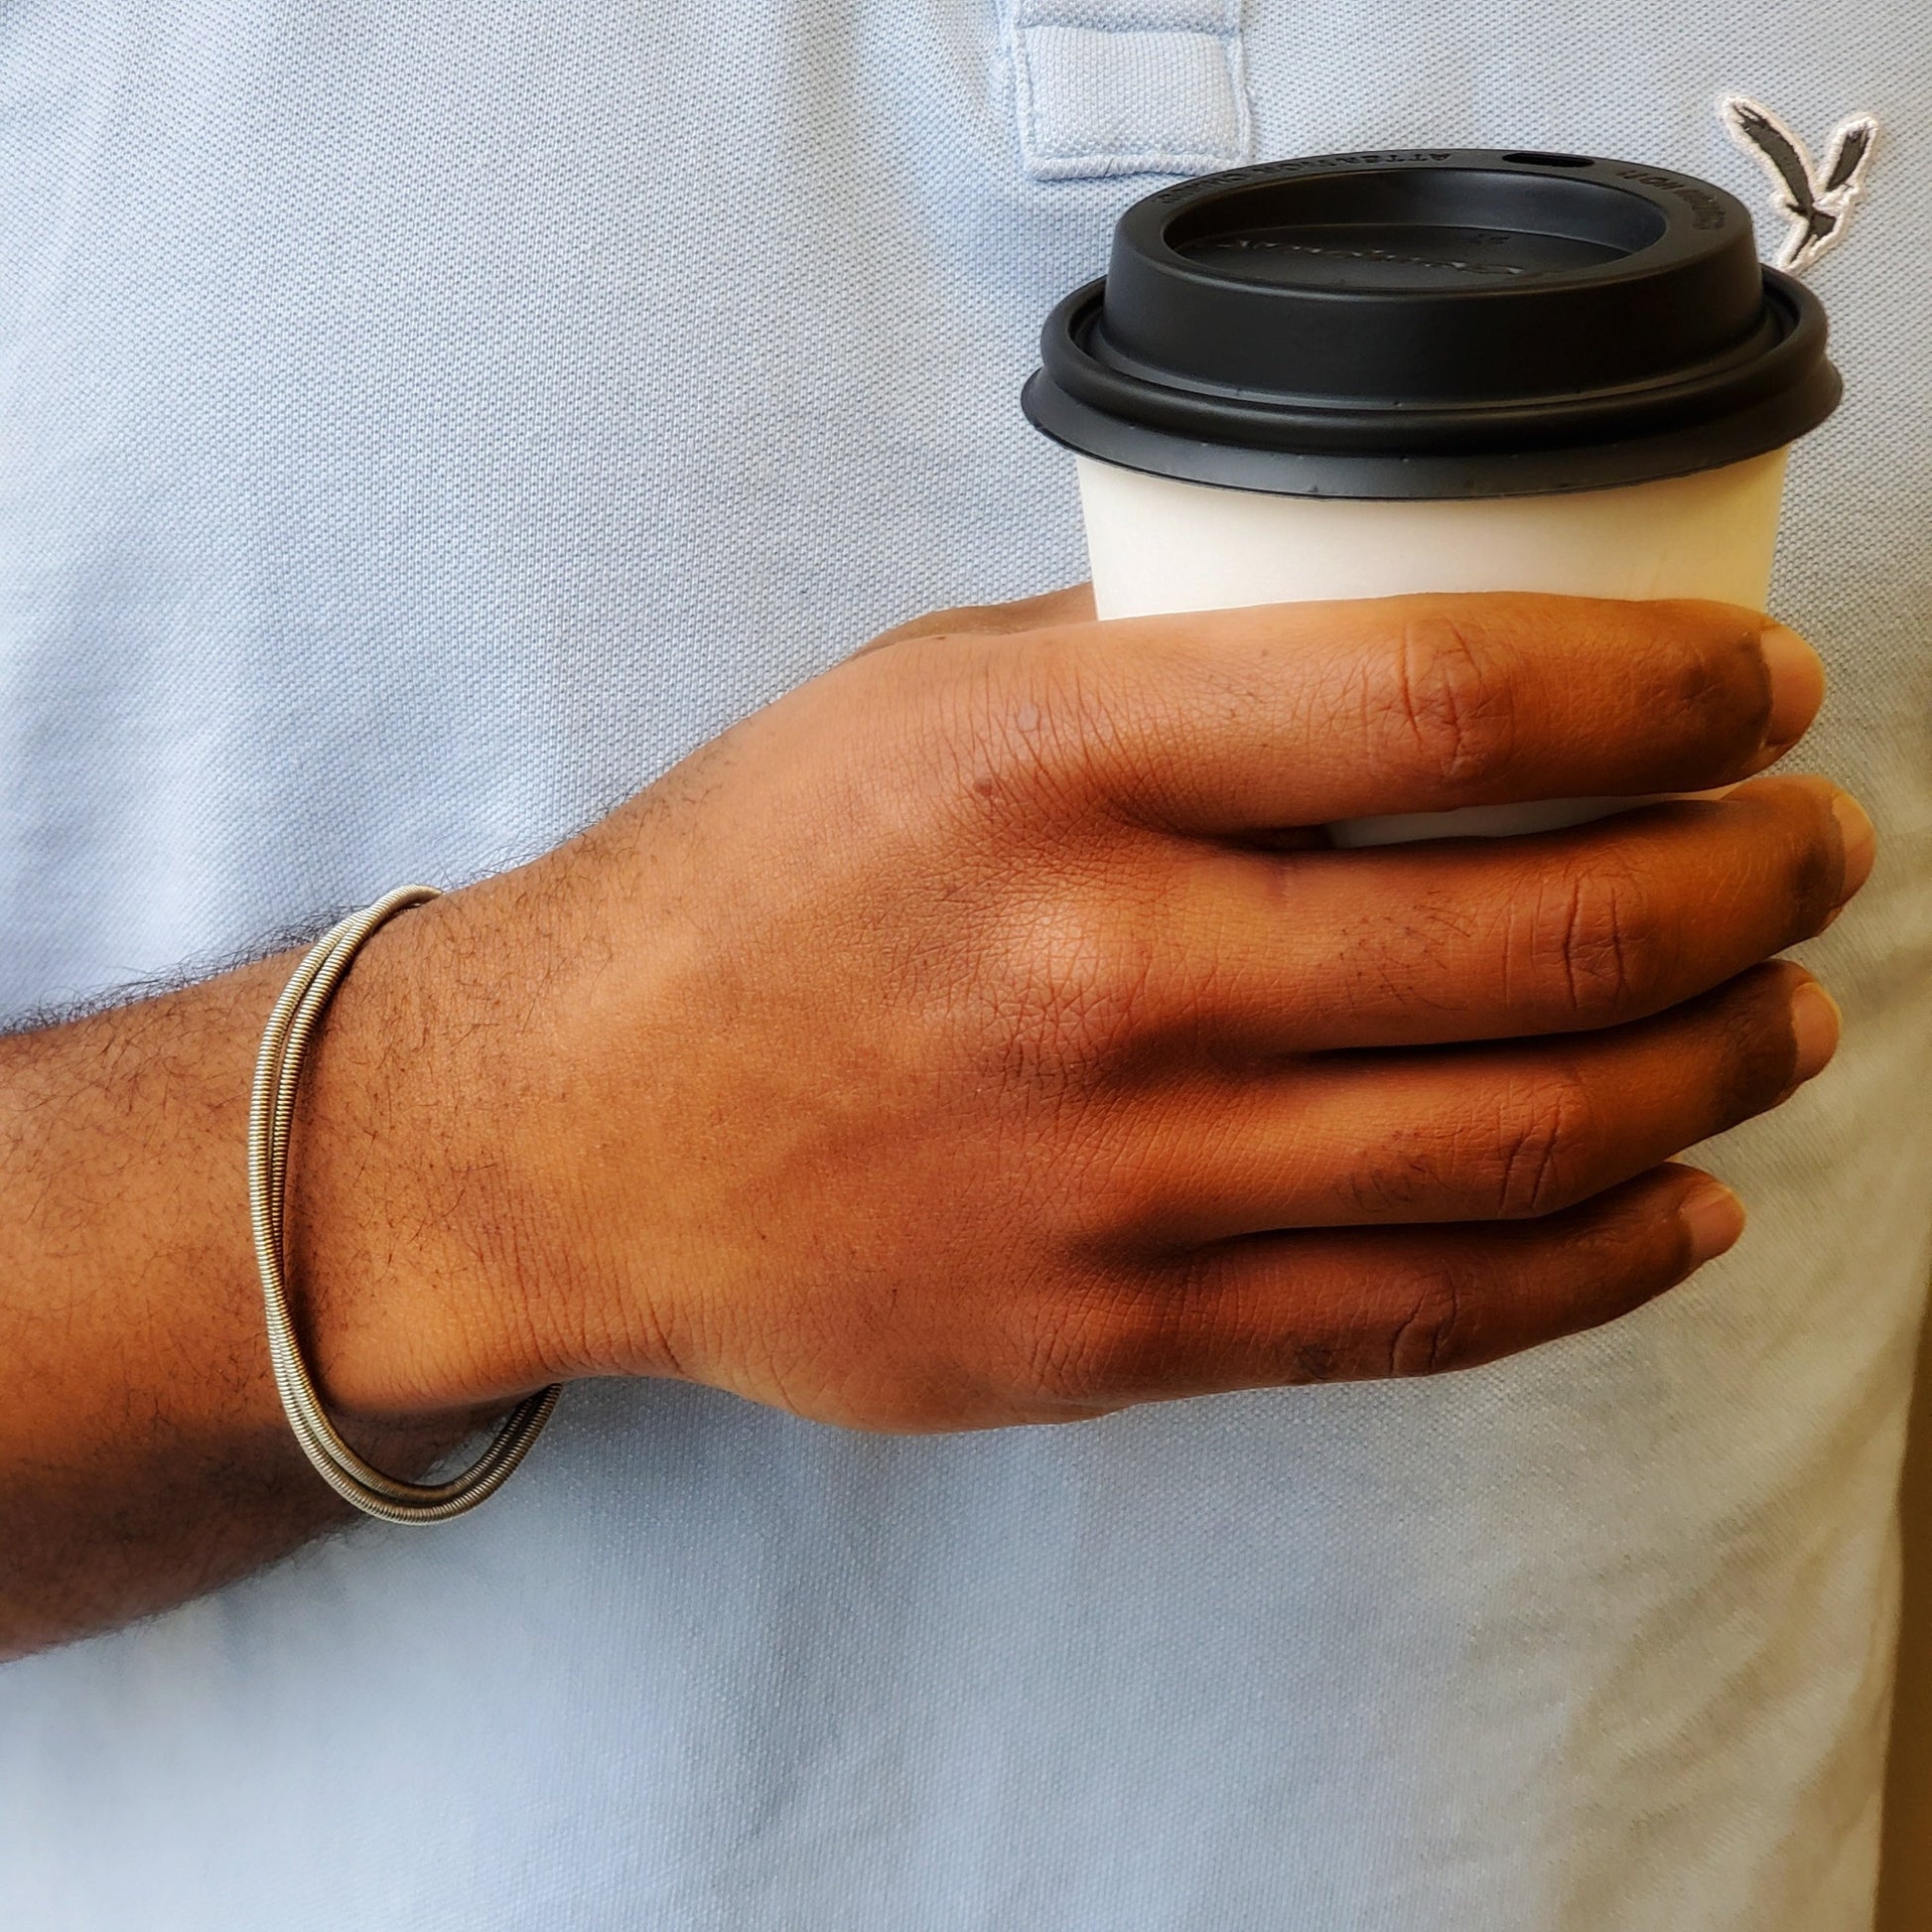 man's hand and wrist - he is holding a black and white coffee cup - on his wrist he is wearing a silver coloured bracelet made from 2 strands of upcycled electric bass strings